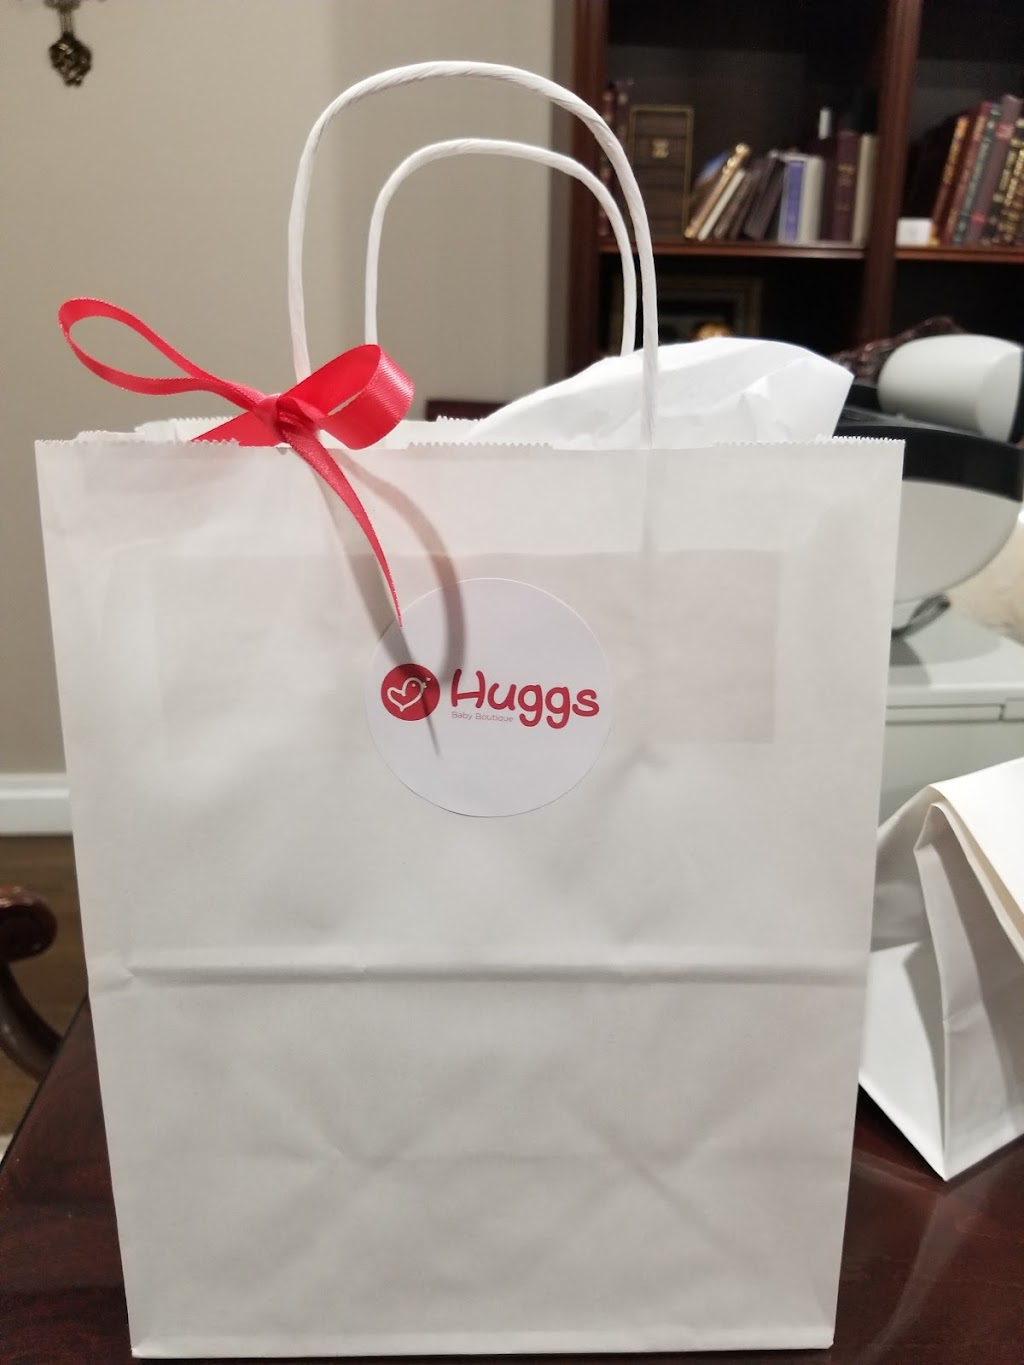 Huggs Baby Boutique | 2 Anthony Dr, Spring Valley, NY 10977 | Phone: (845) 499-8735